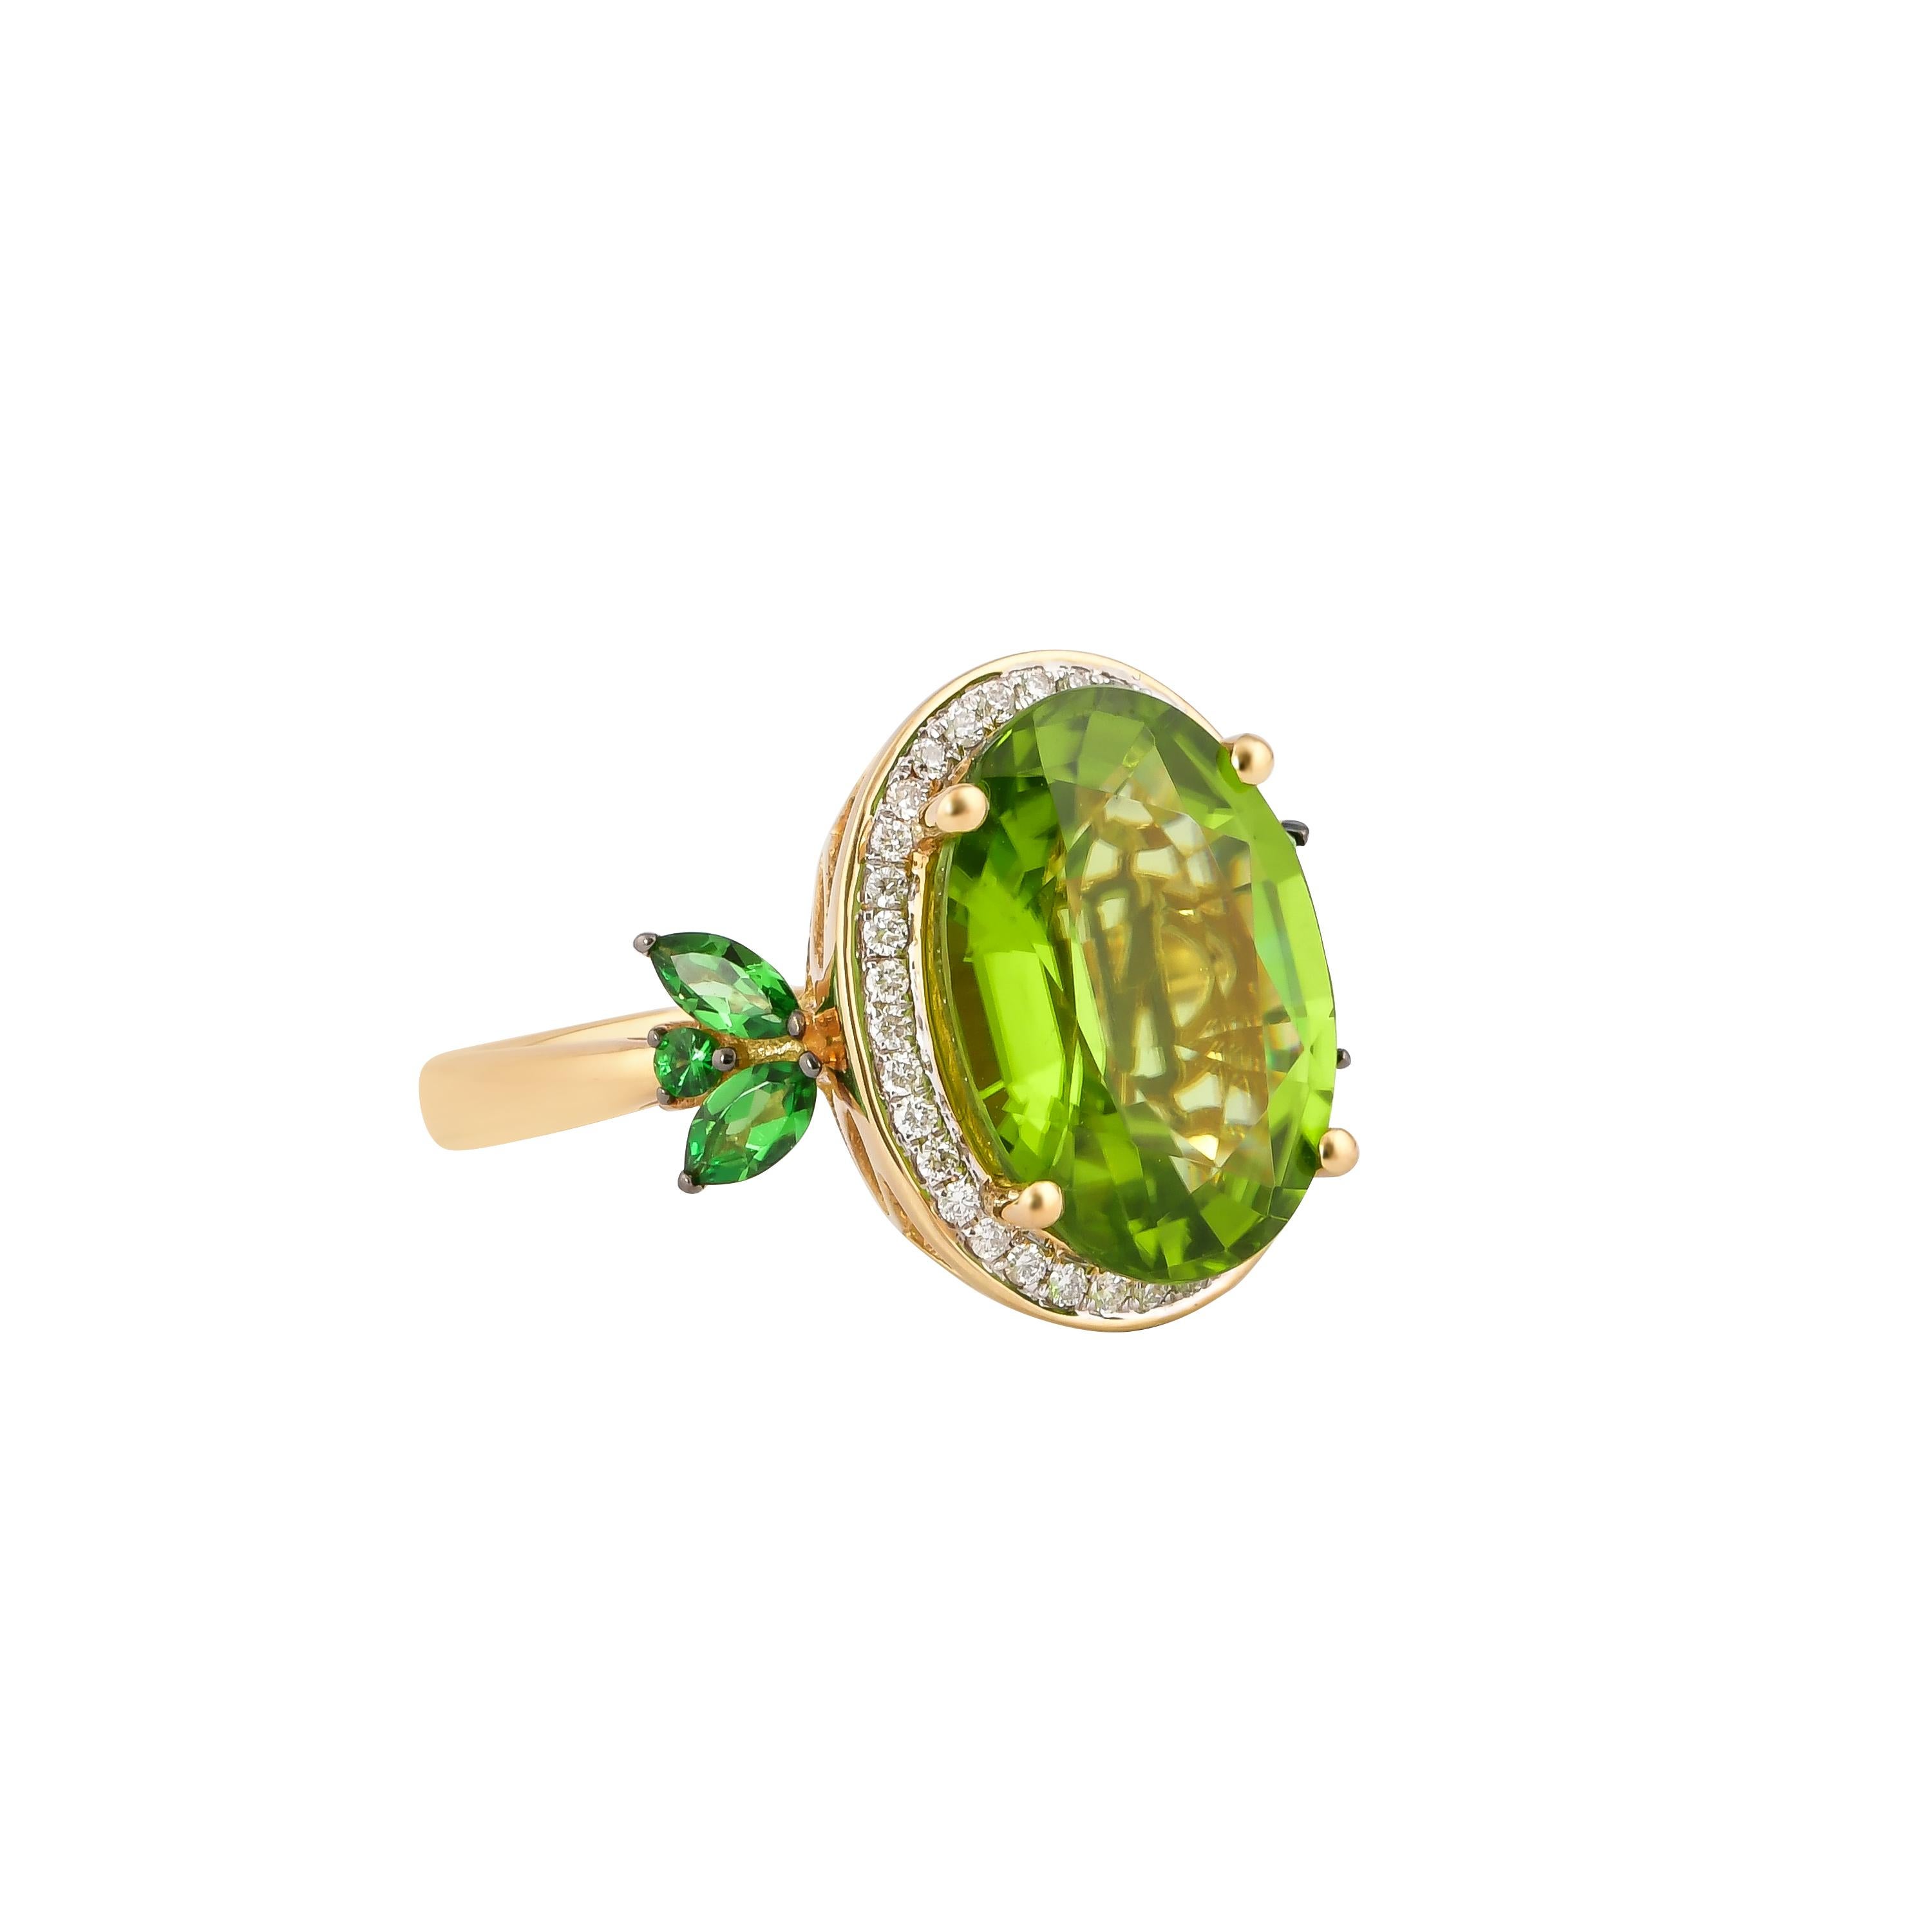 This collection features an array of pretty peridot rings! Accented with diamonds these rings are made in yellow gold and present a vibrant and fresh look. 

Classic peridot ring in 18K yellow gold with diamonds. 

Peridot: 7.15 carat oval